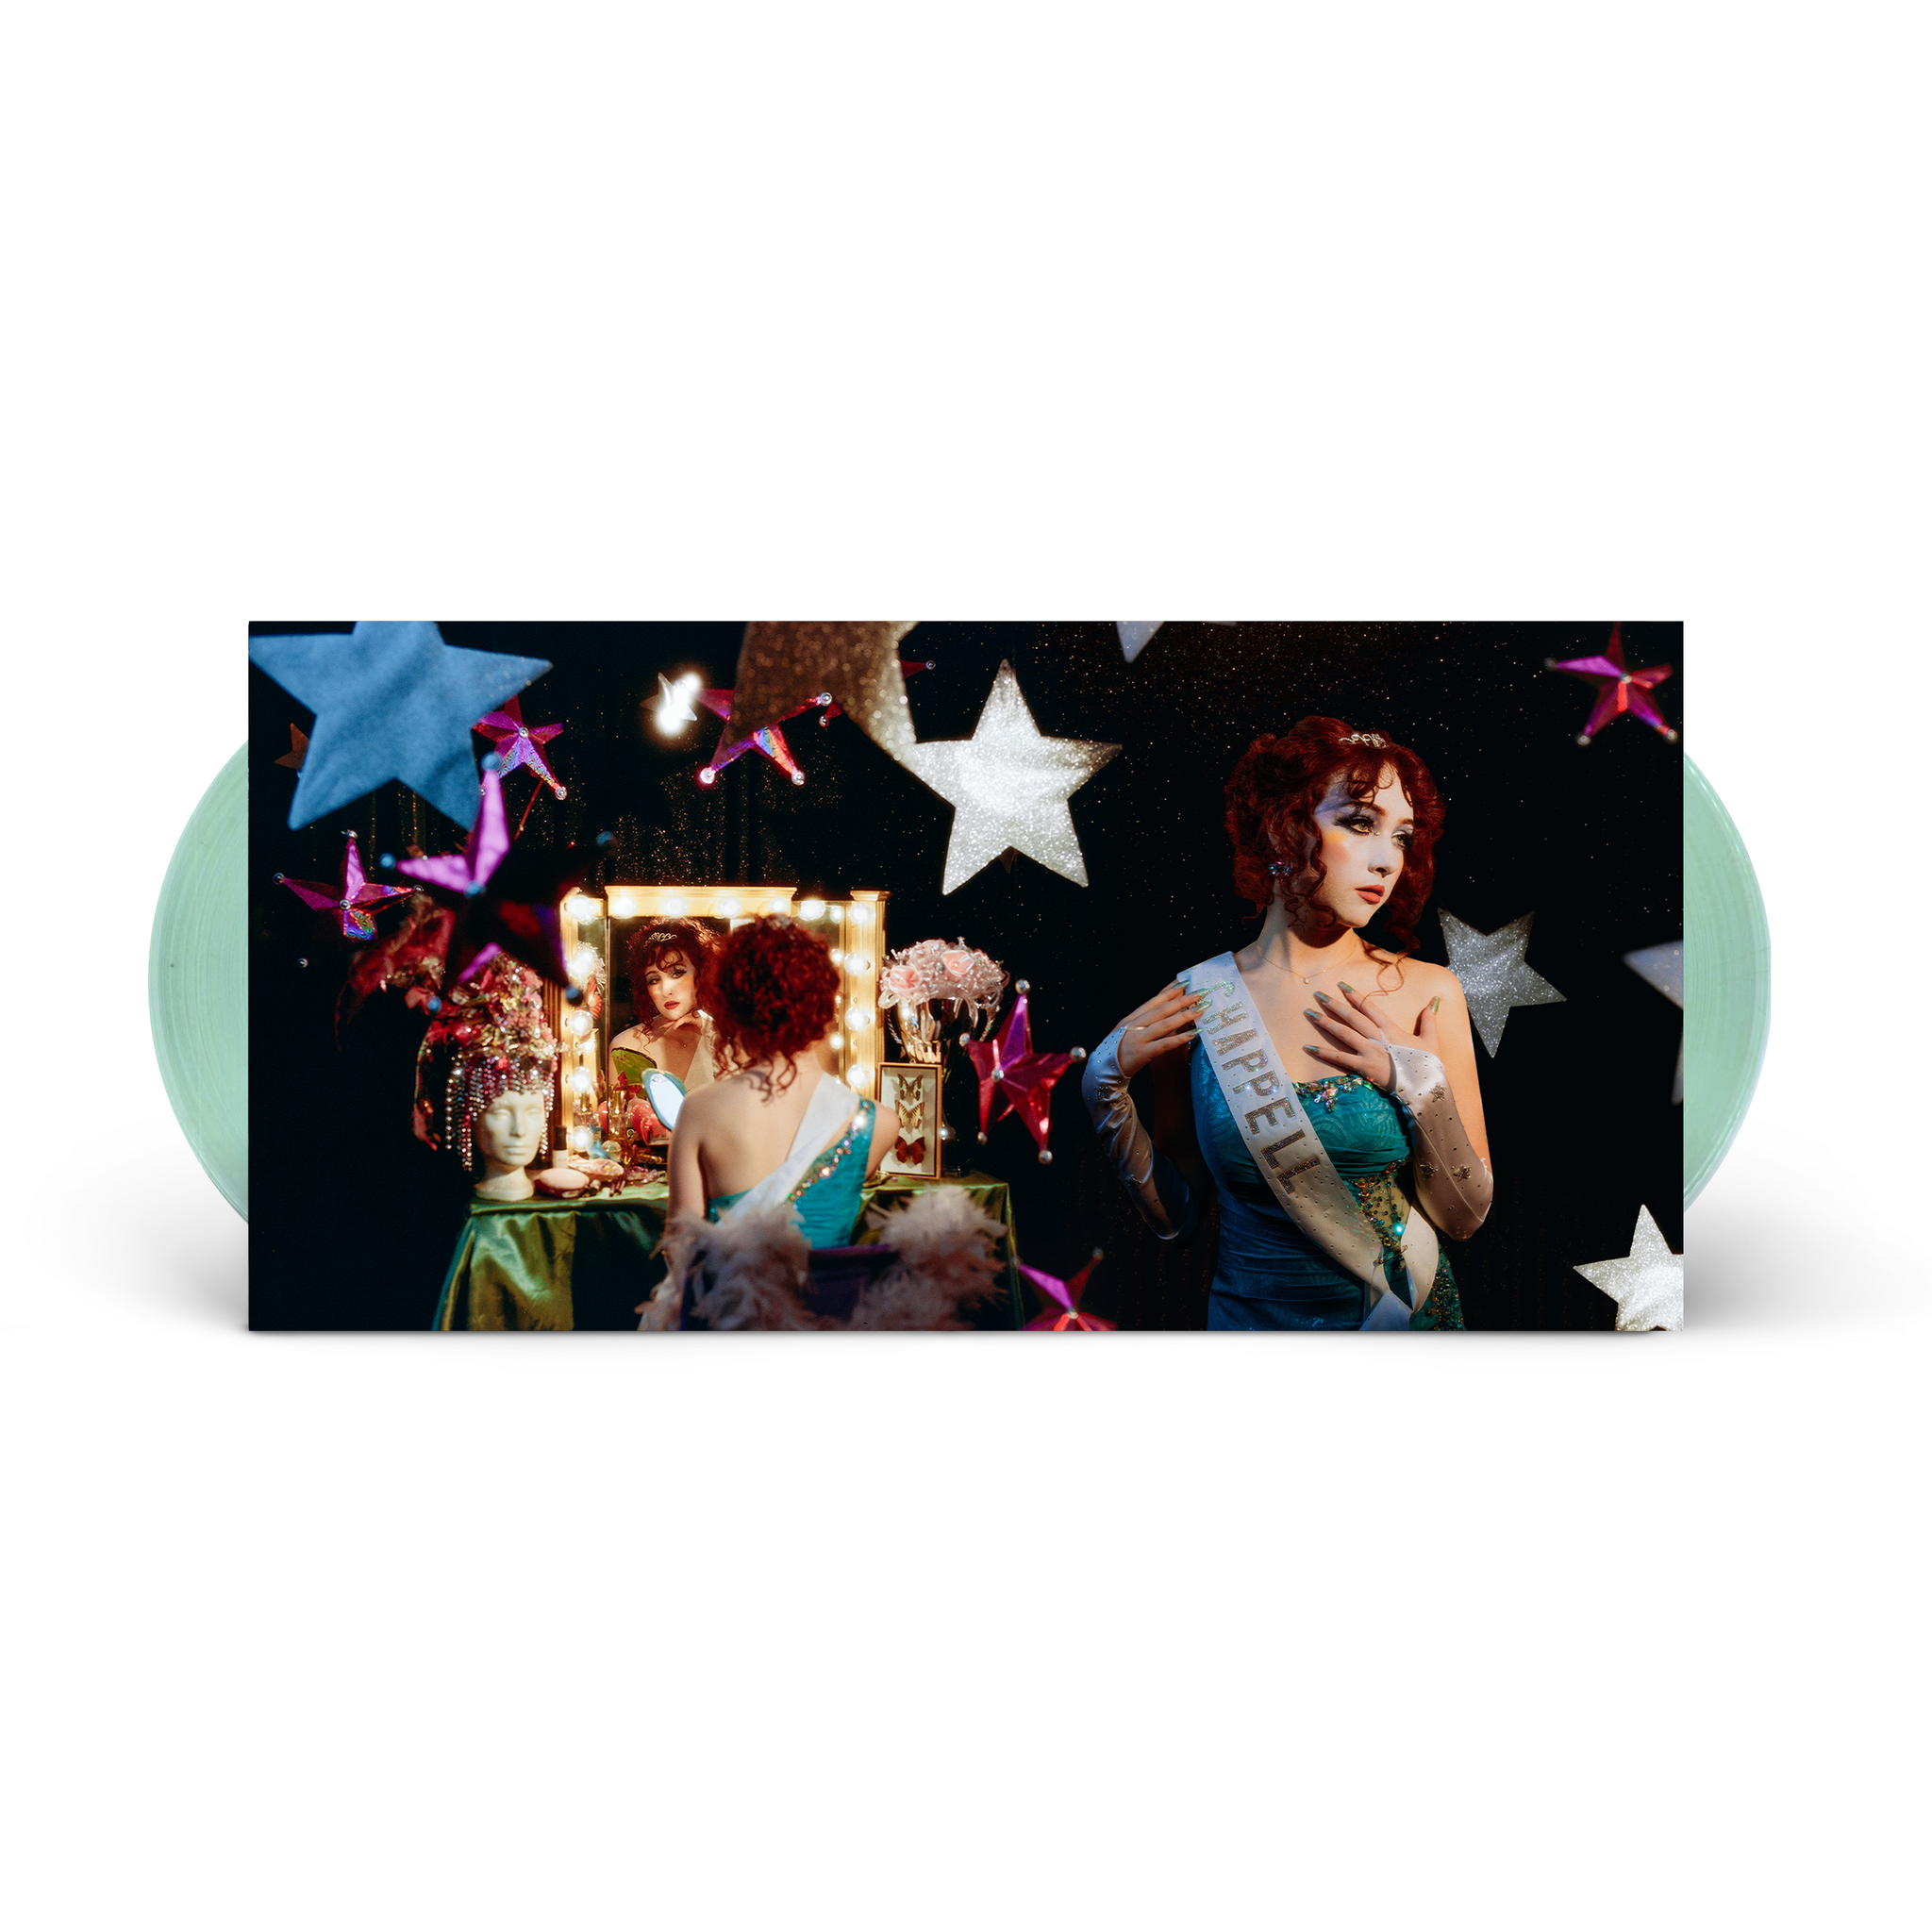 CHAPPELL ROAN - The Rise And Fall Of A Midwest Princess (Popstar Edition) - 2LP - Coke Bottle Clear Vinyl [JUL 26]